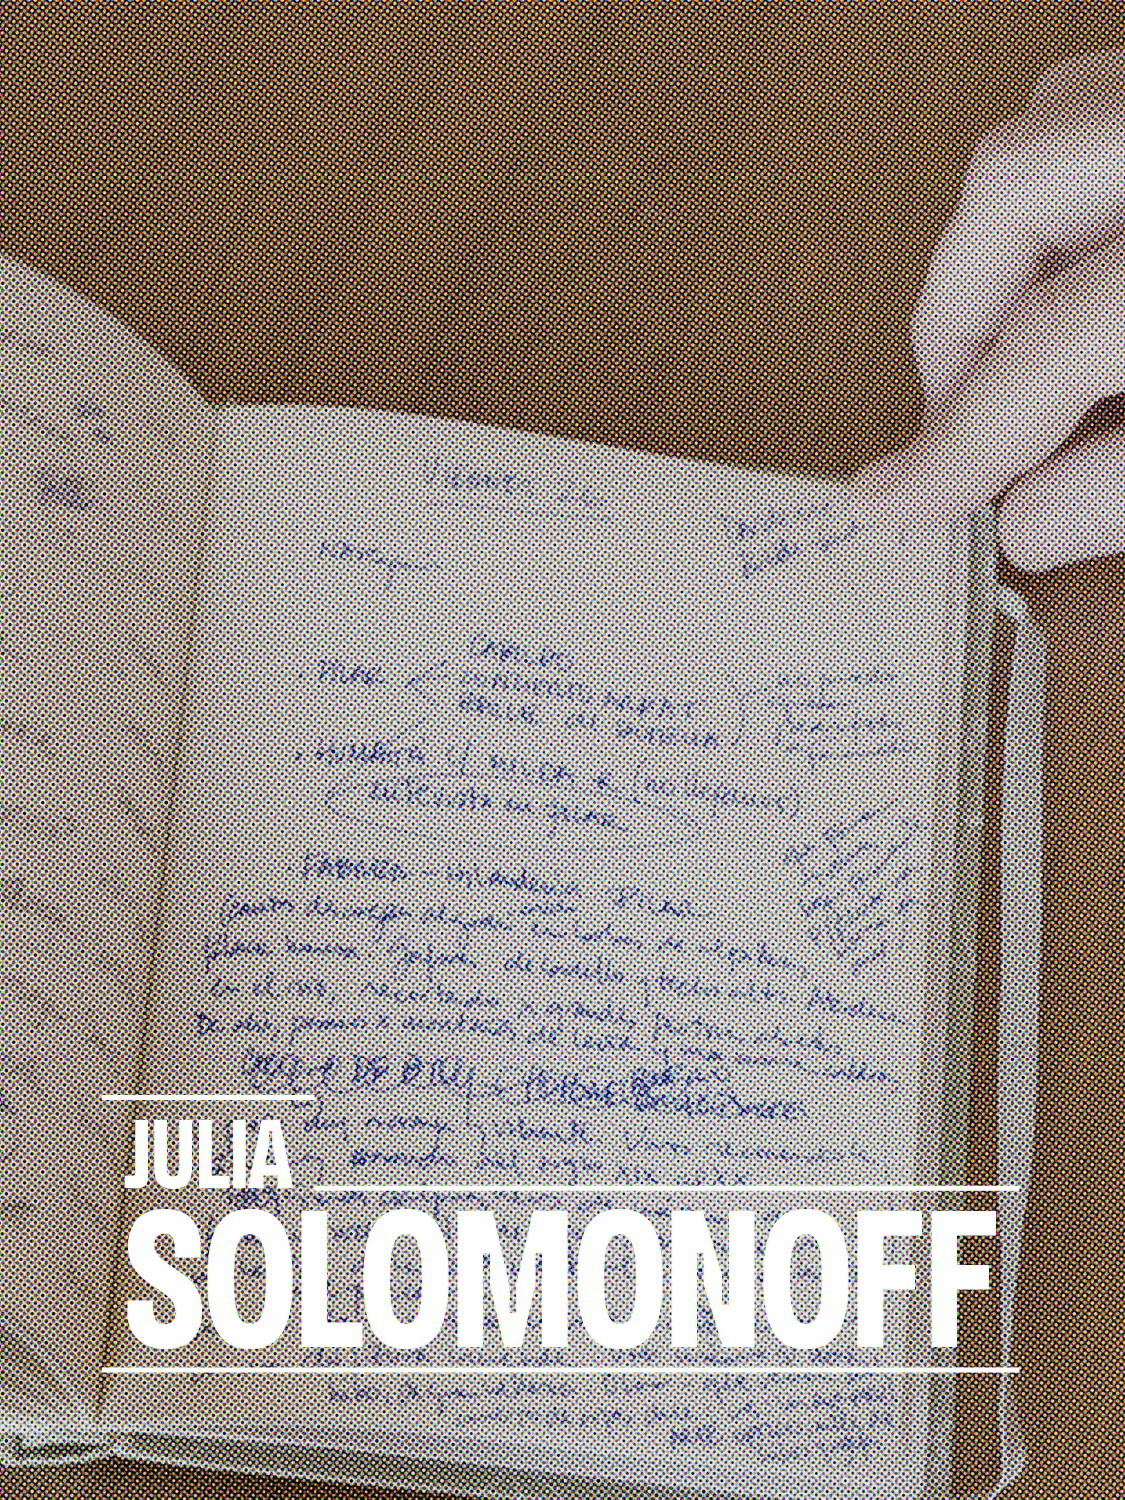 The name Julia Solomonoff in white type over an image of a notebook with writing in it held open by three fingers in its top right corner